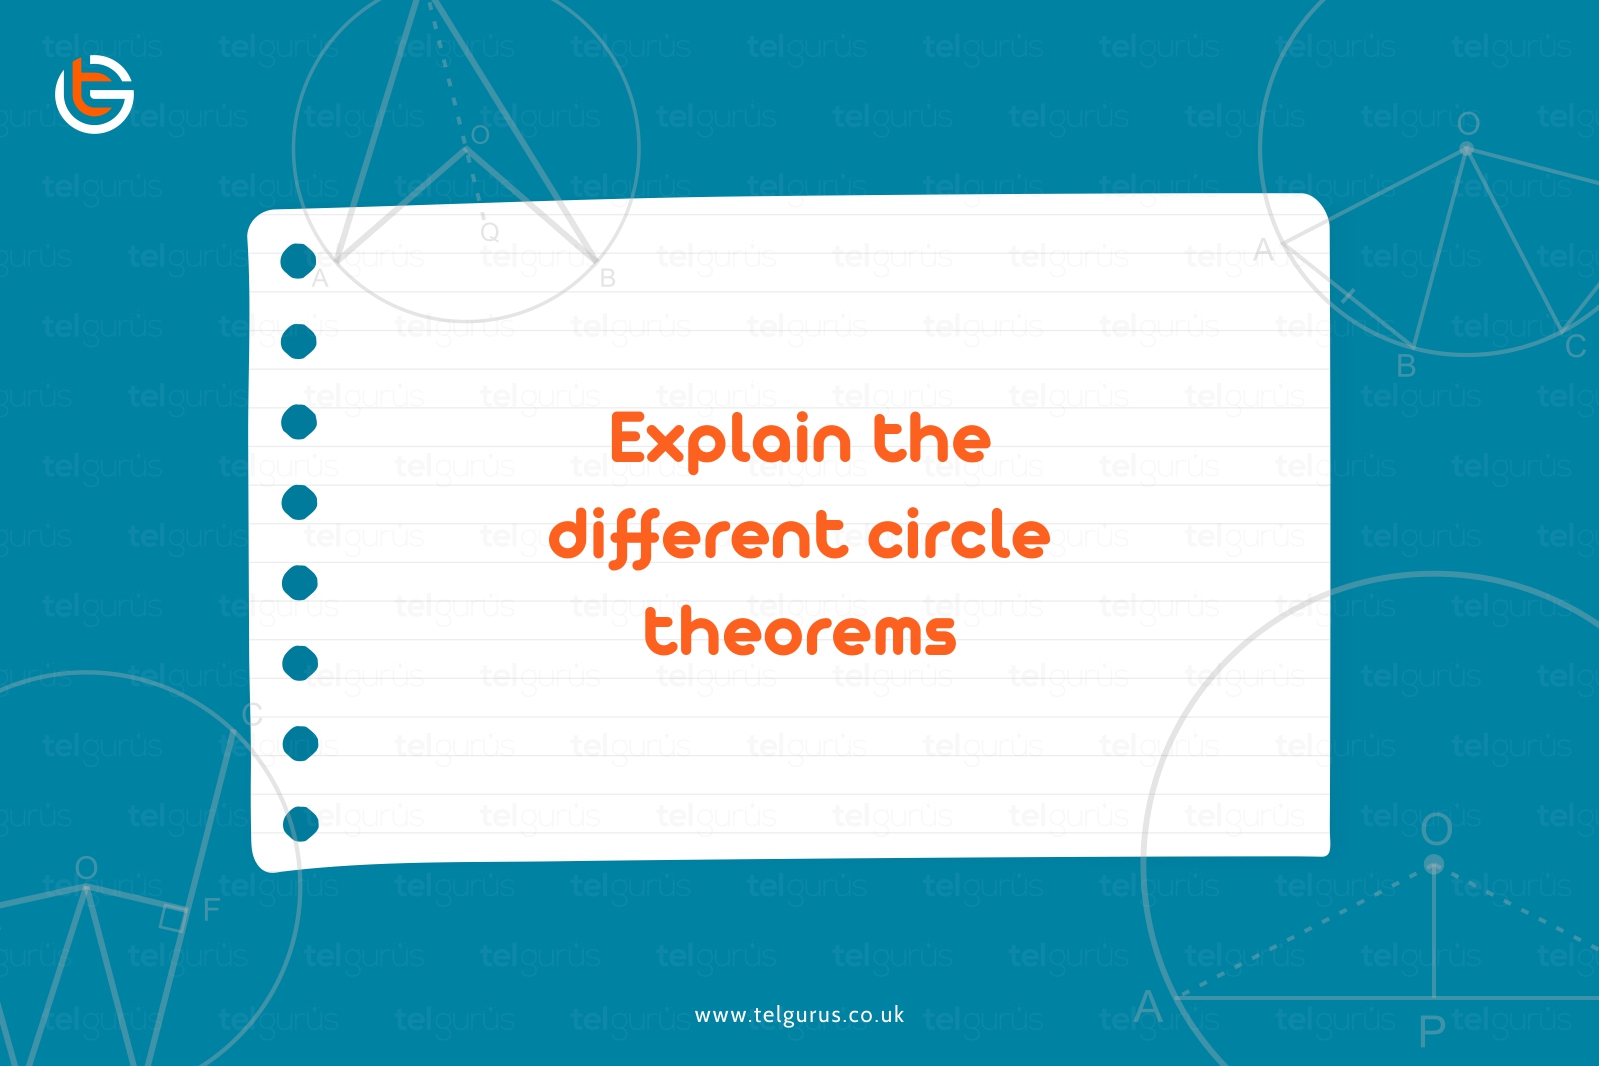 Explain the different circle theorems